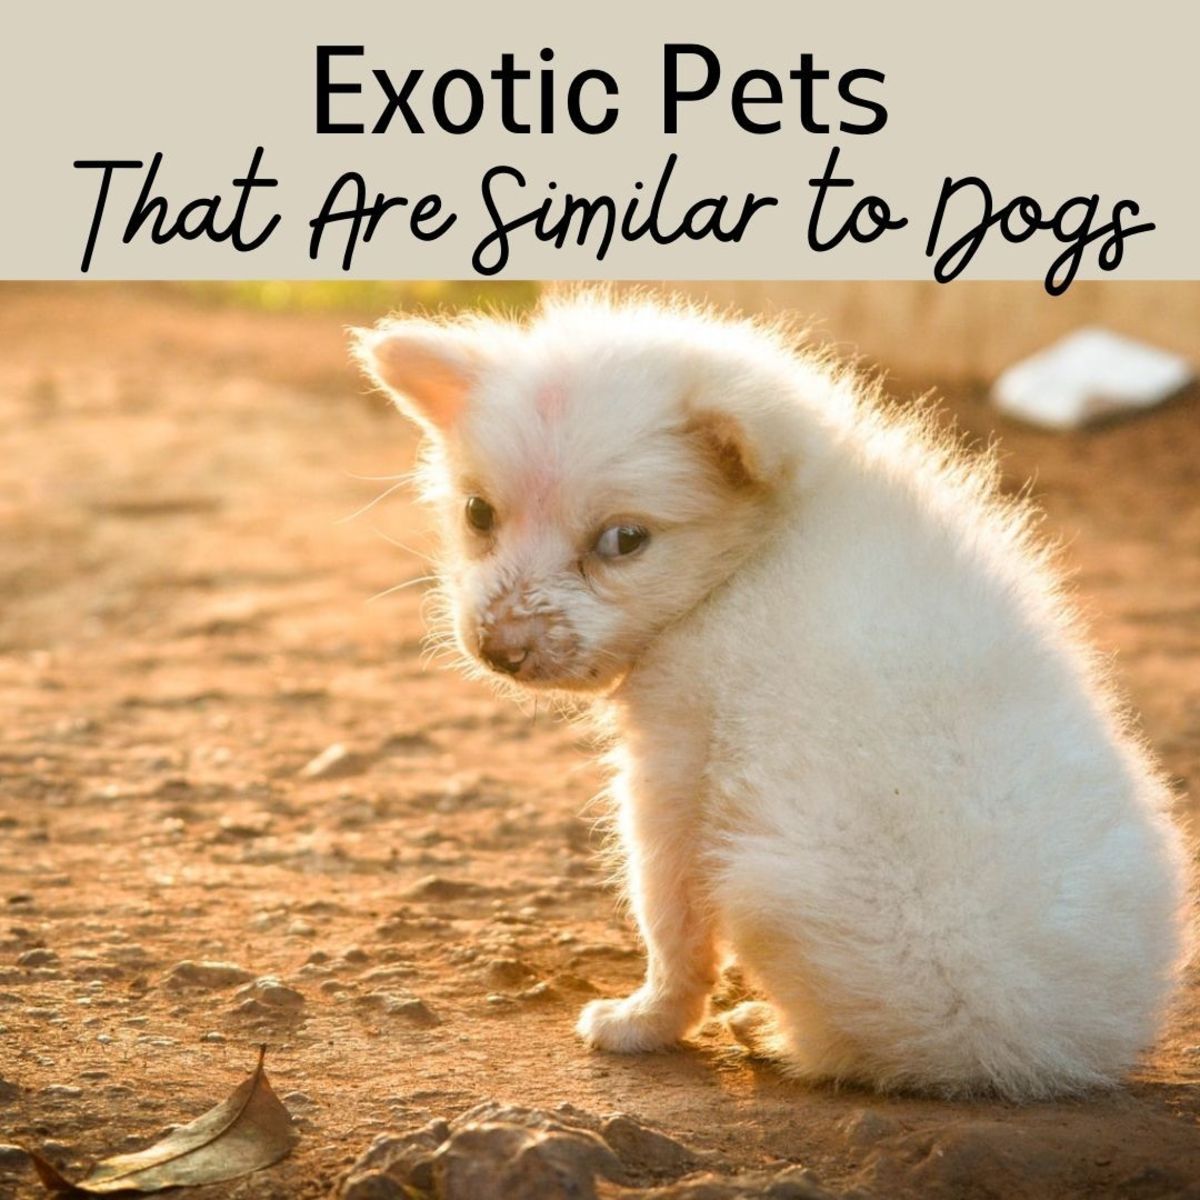 5 Exotic Pets That Are Like Dogs - PetHelpful